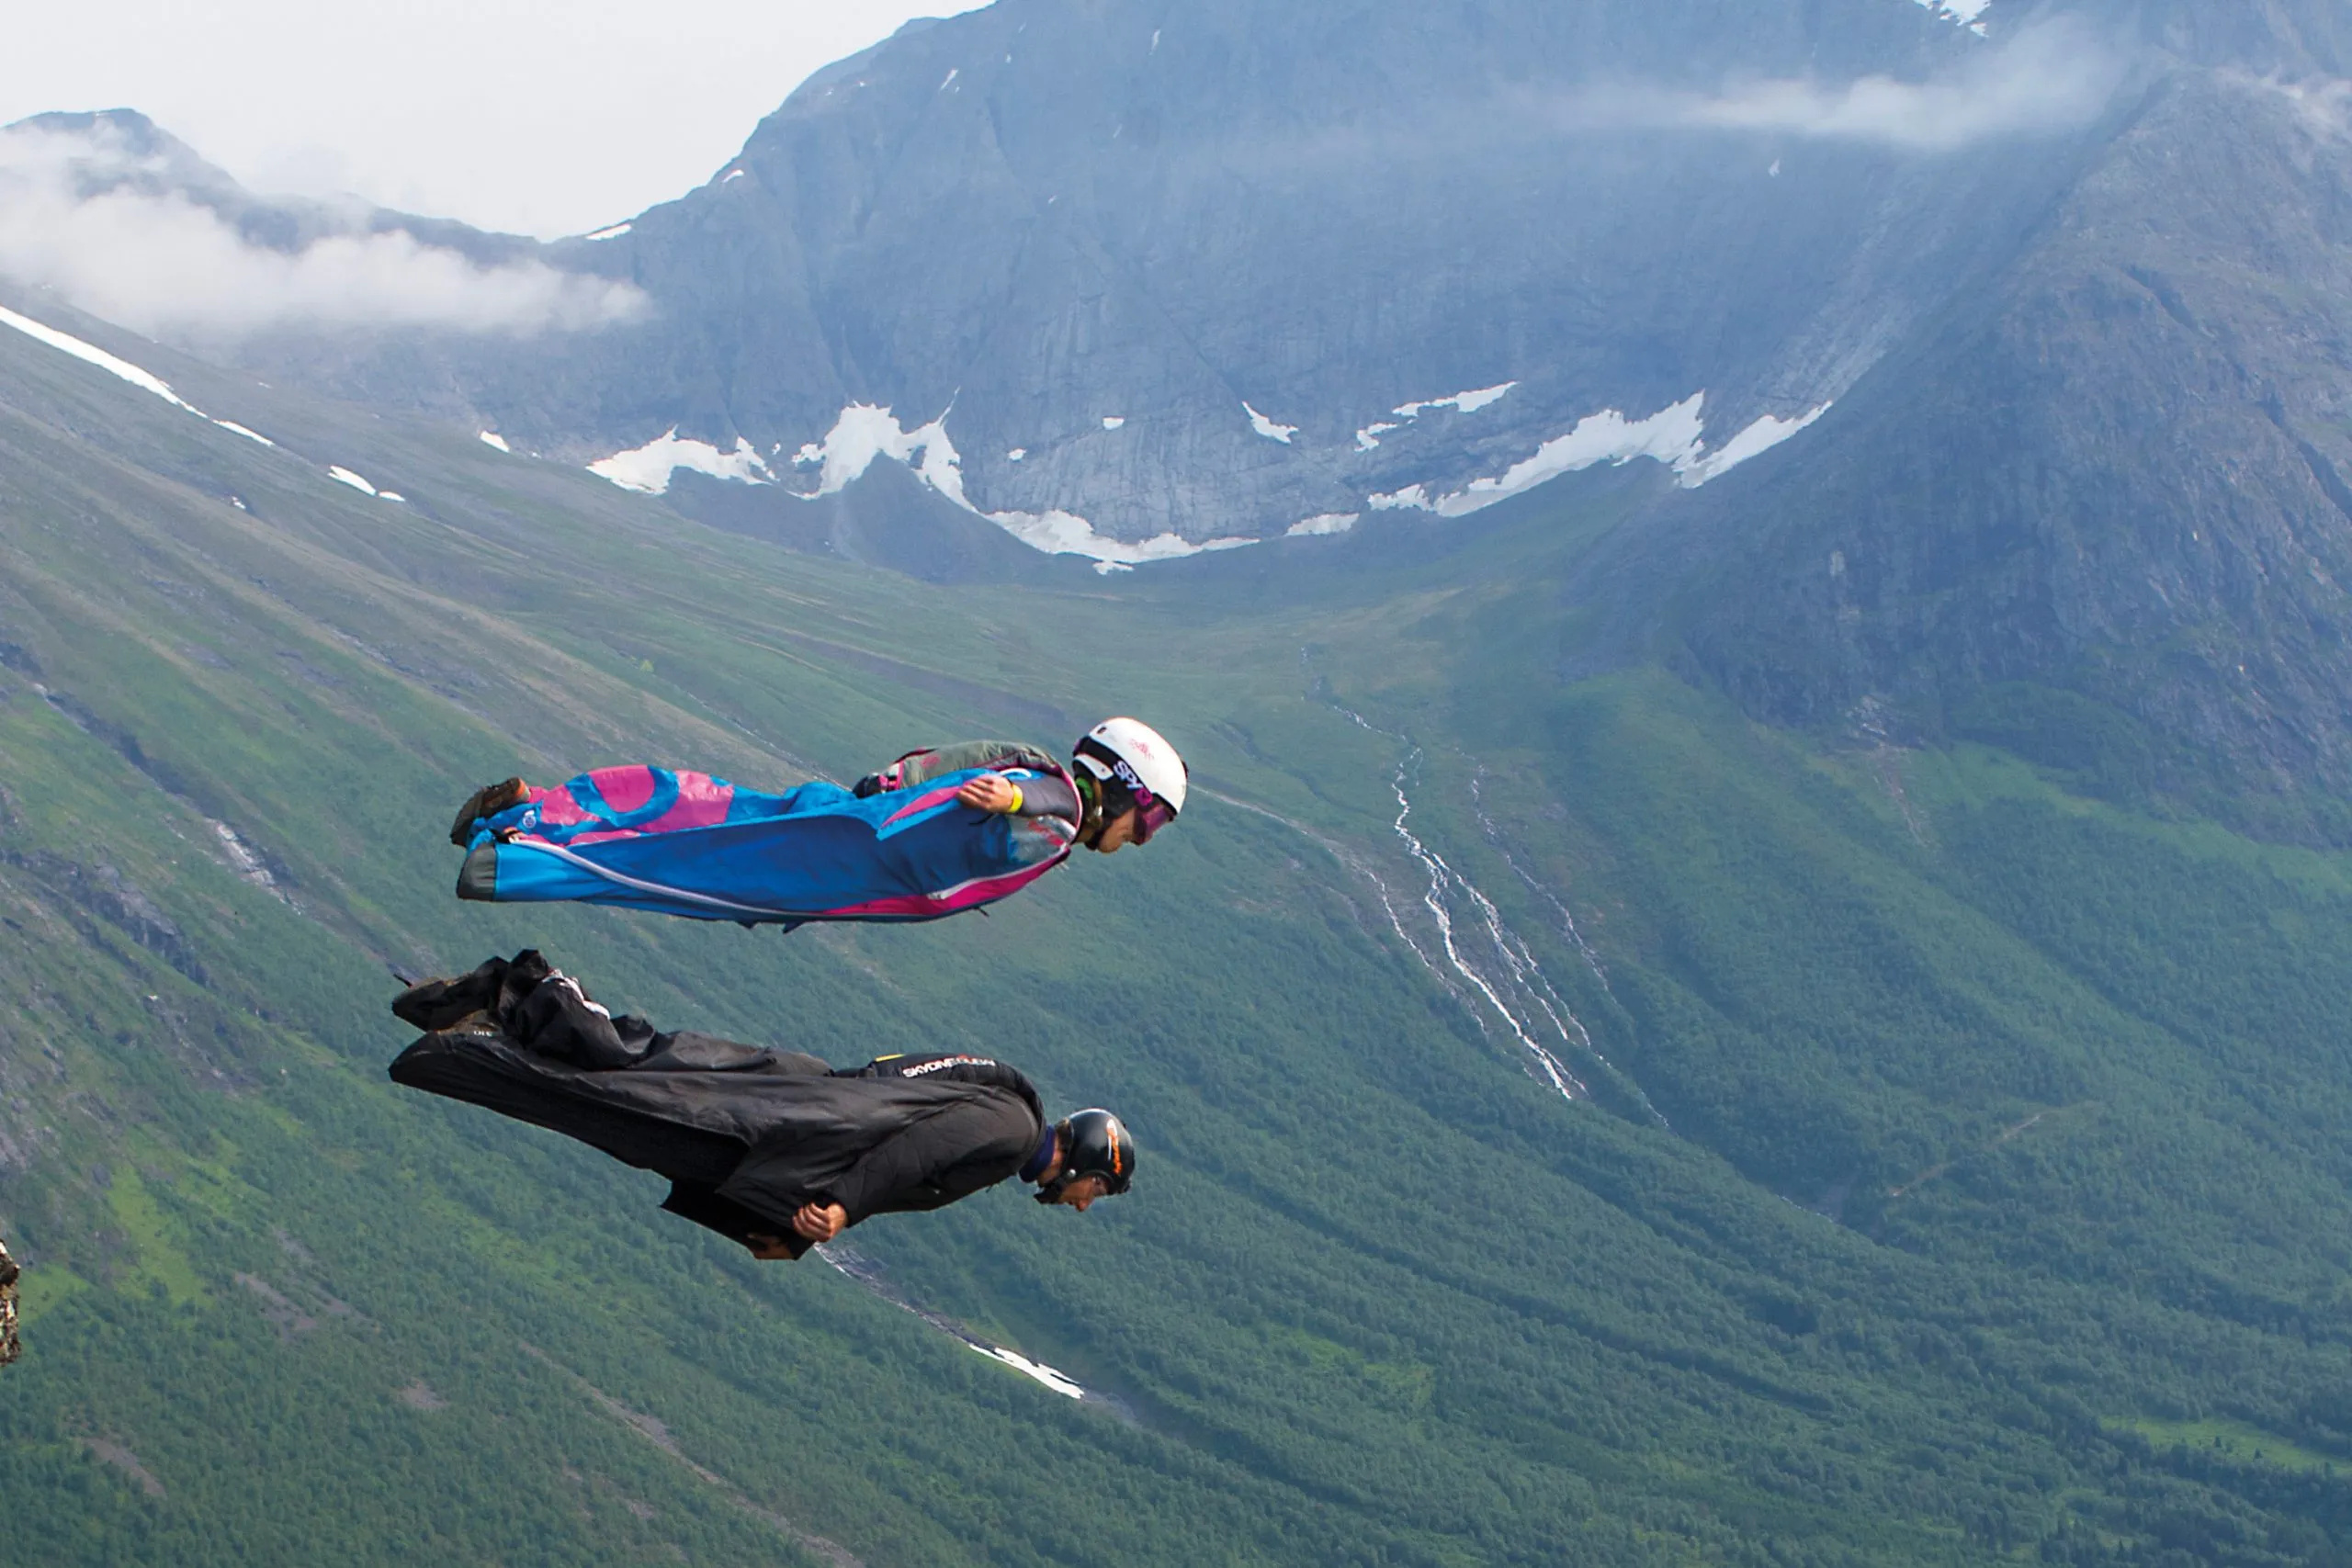 Wingsuit Flying: Tandem birdman suits flying in the mountains, Adventure sport. 2560x1710 HD Wallpaper.